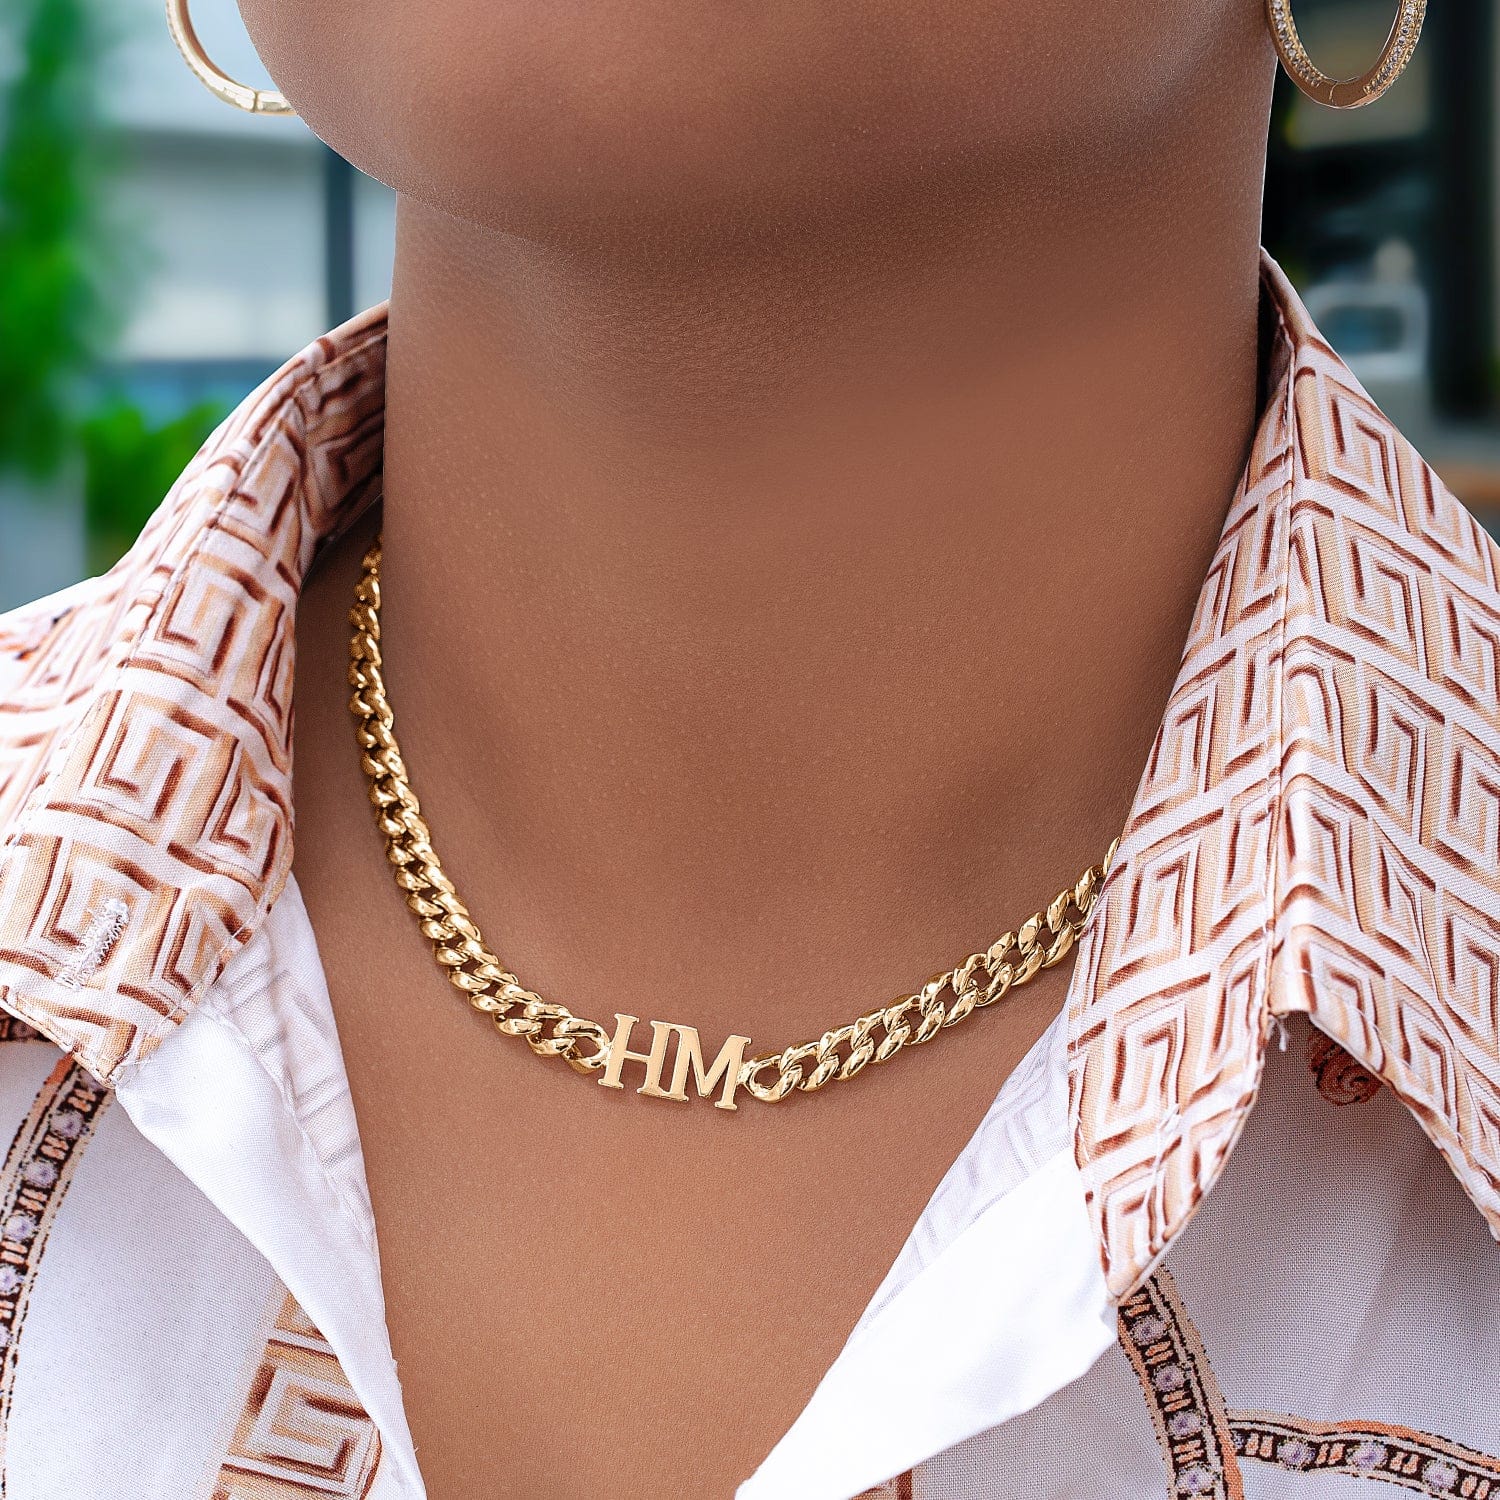 14k Gold over Sterling Silver / Cuban Chain Two Intial Choker Necklace with Cuban Chain